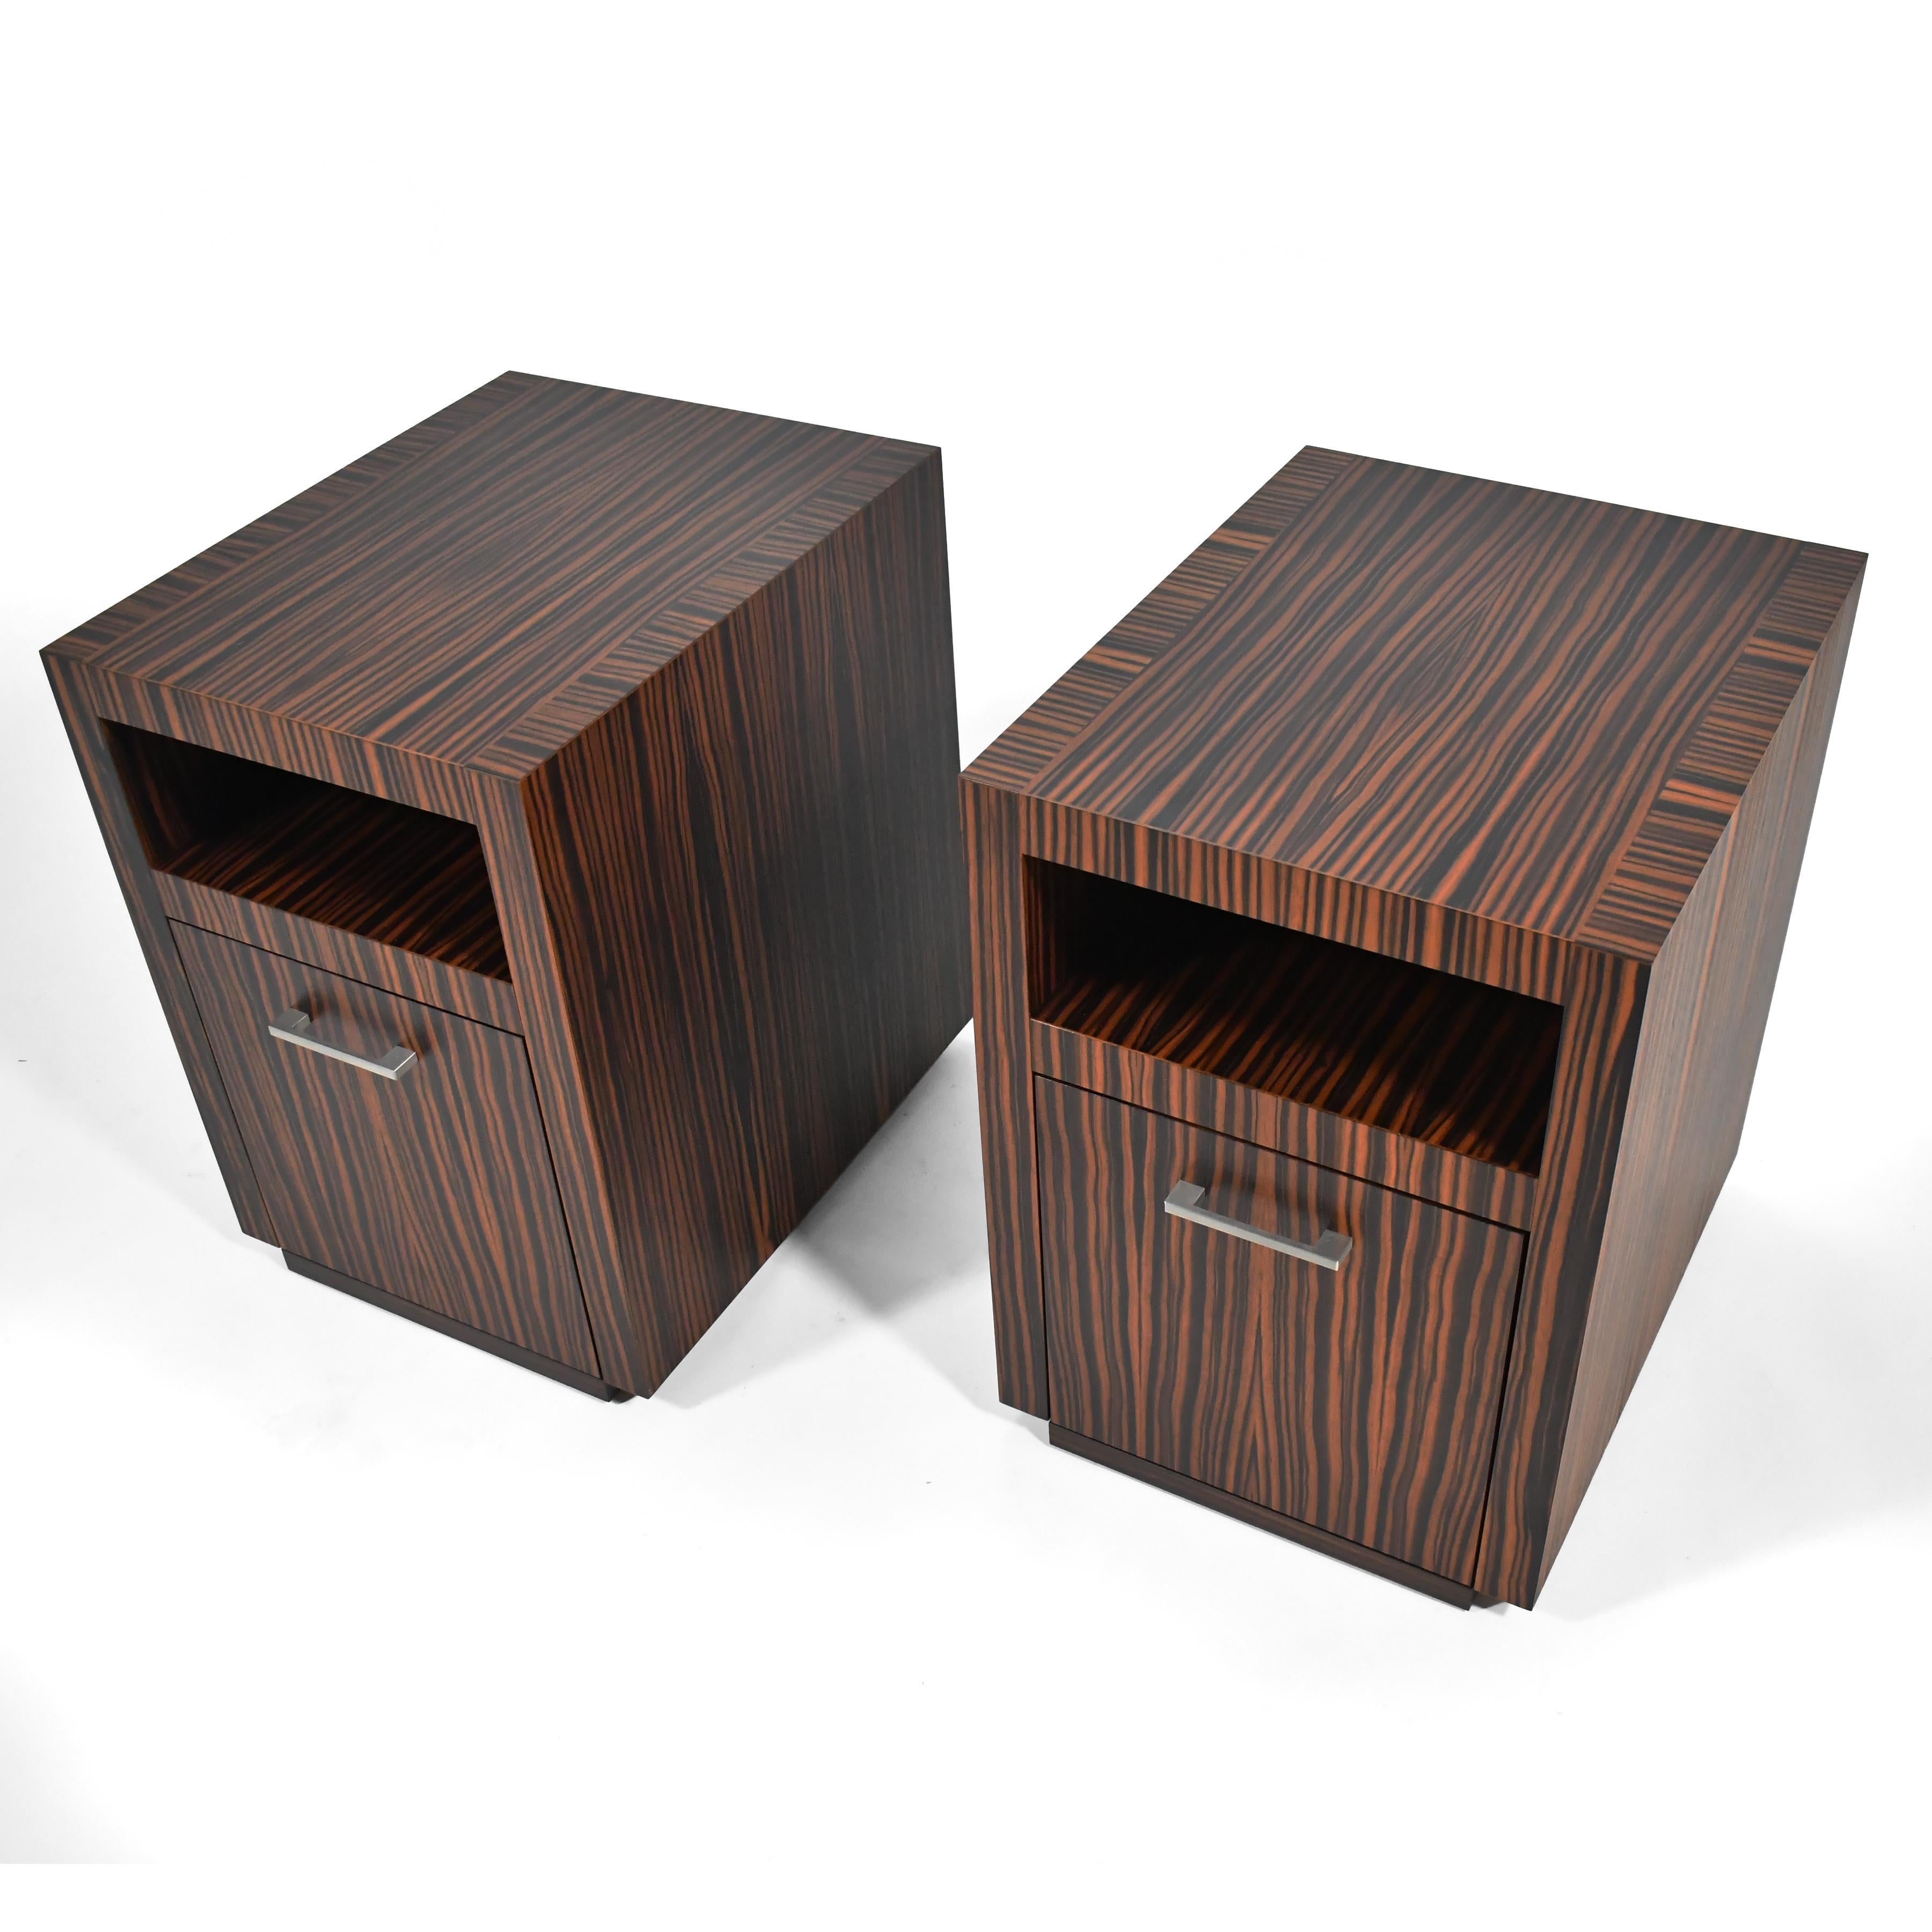 Pair of Bespoke Nightstands in Zebra Wood In Good Condition For Sale In Highland, IN